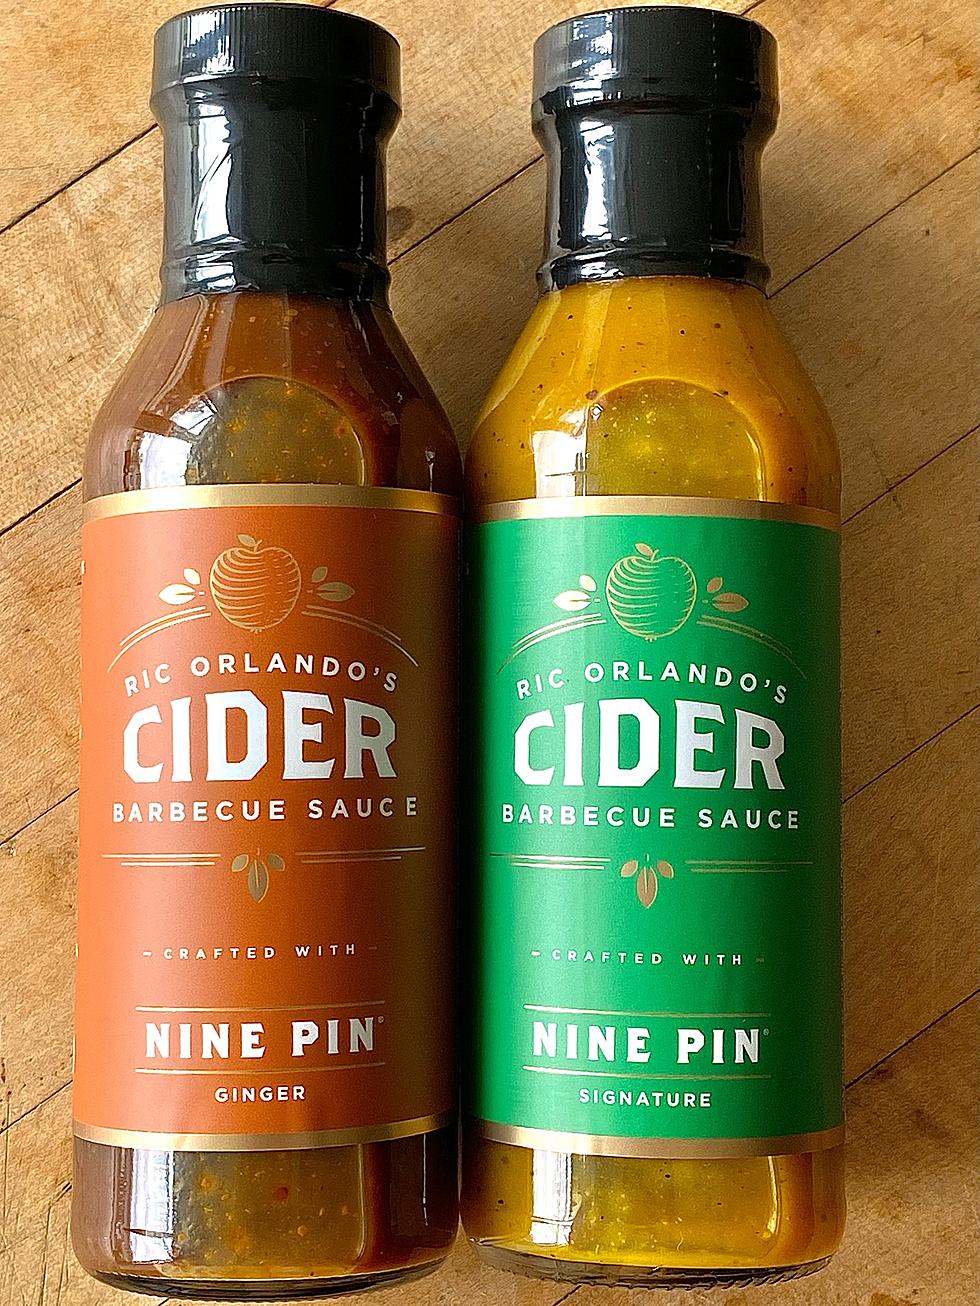 Hudson Valley Chef Teams with Cider Maker for New BBQ Sauce